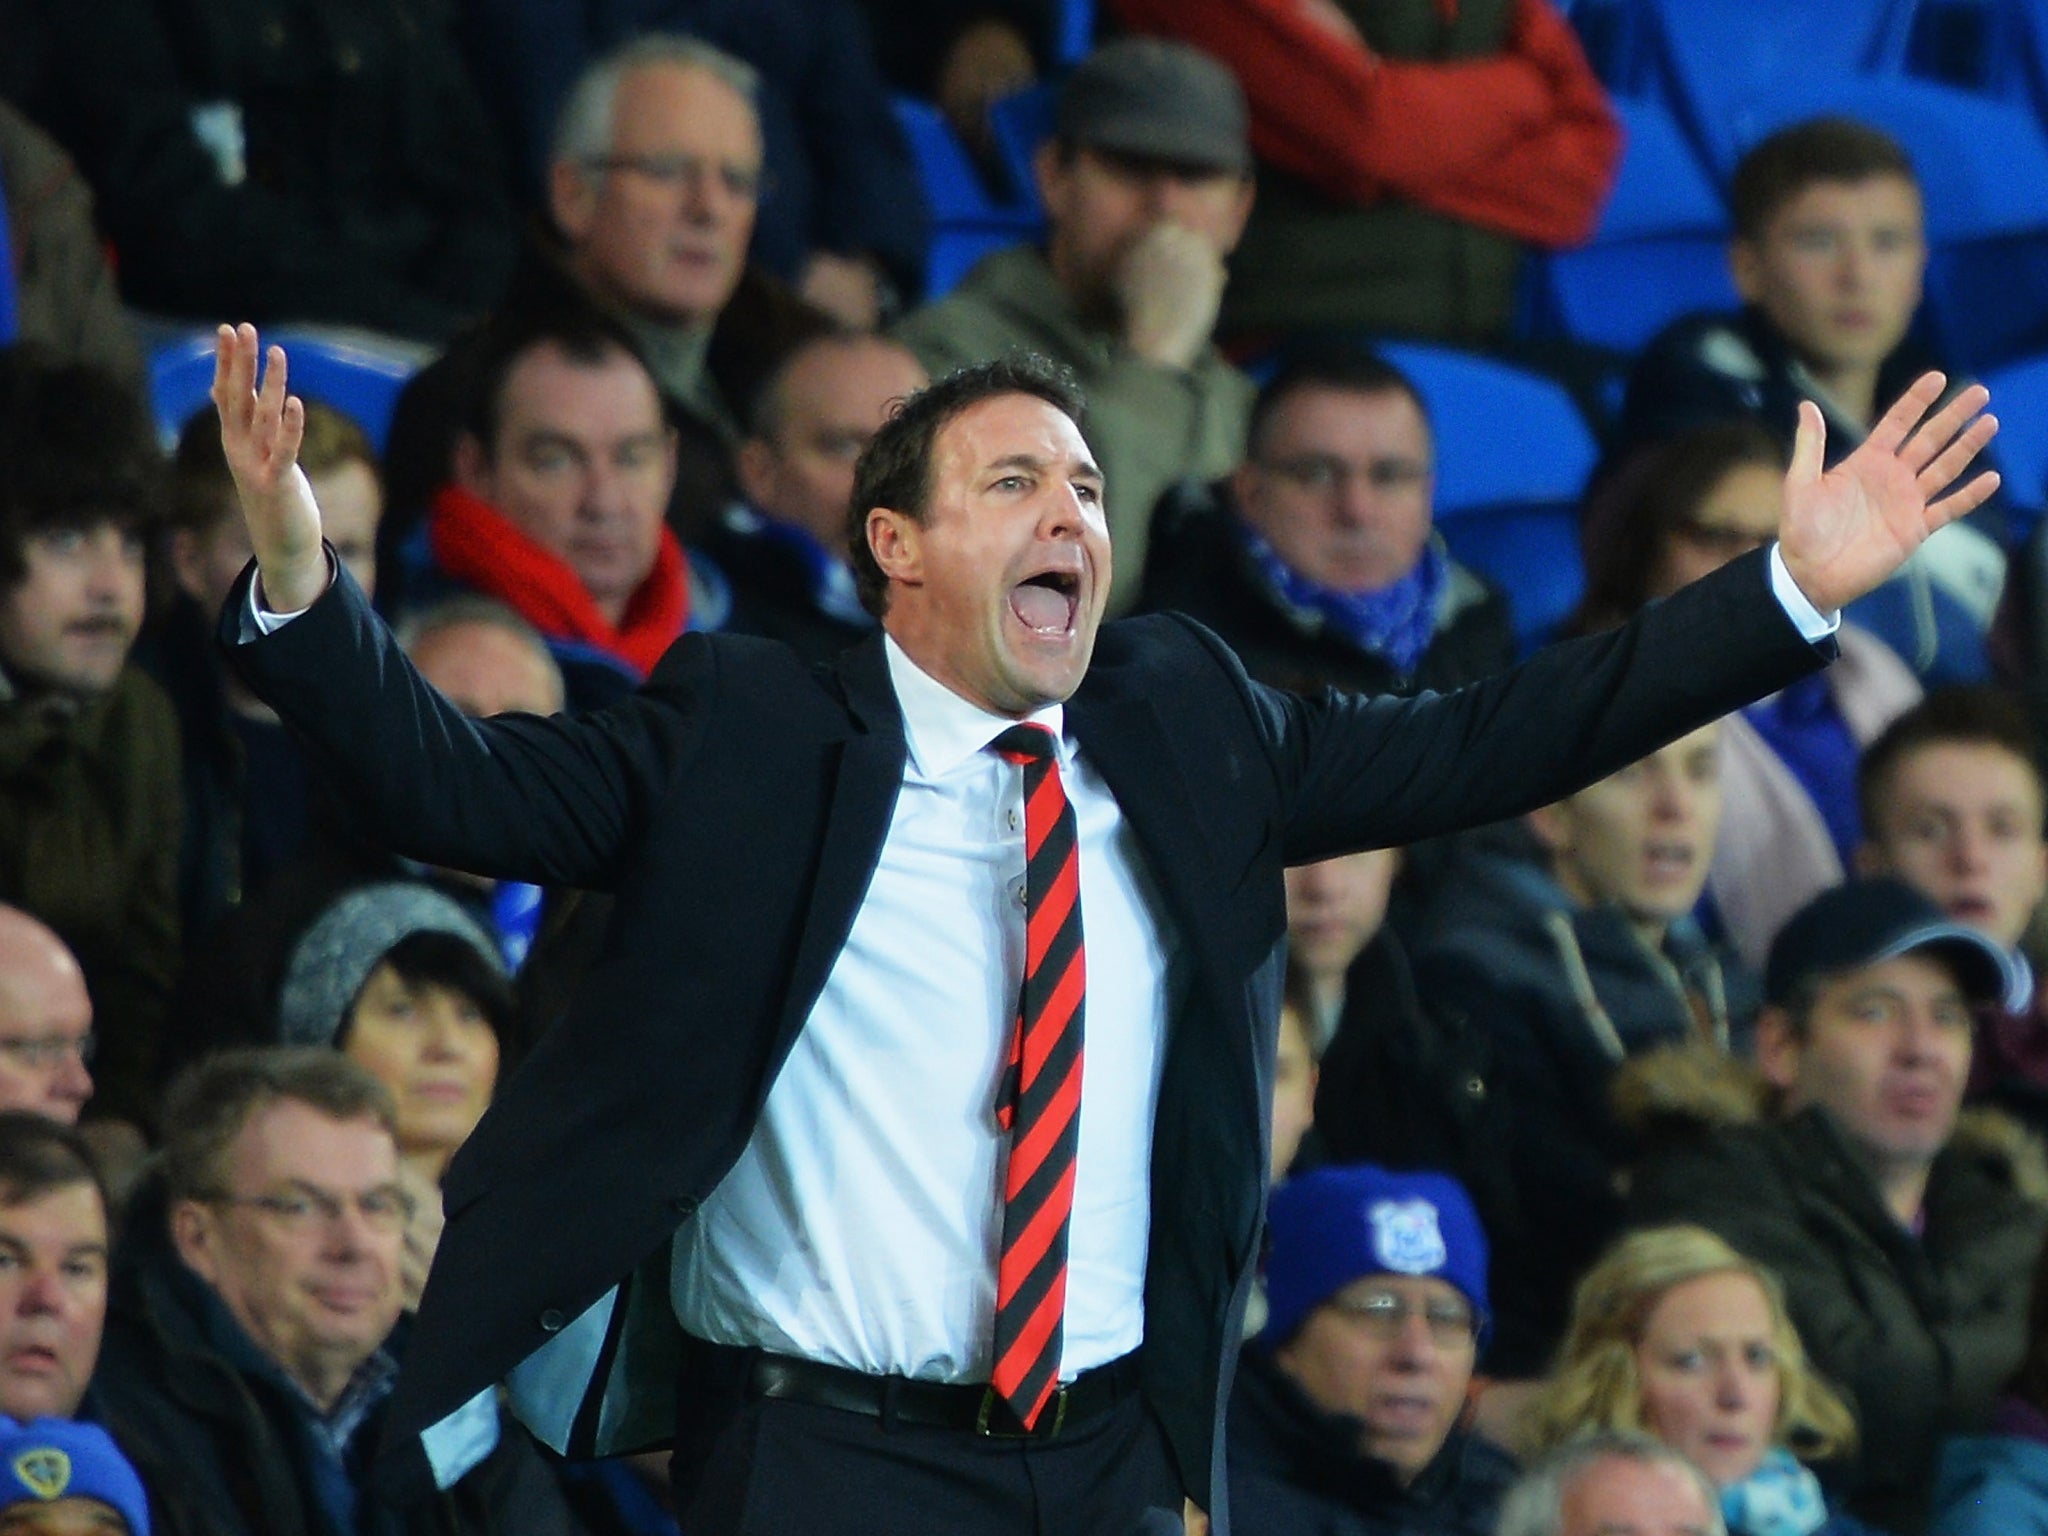 Malky Mackay remonstrates on the sidelines during Cardiff's 3-0 loss to Southampton